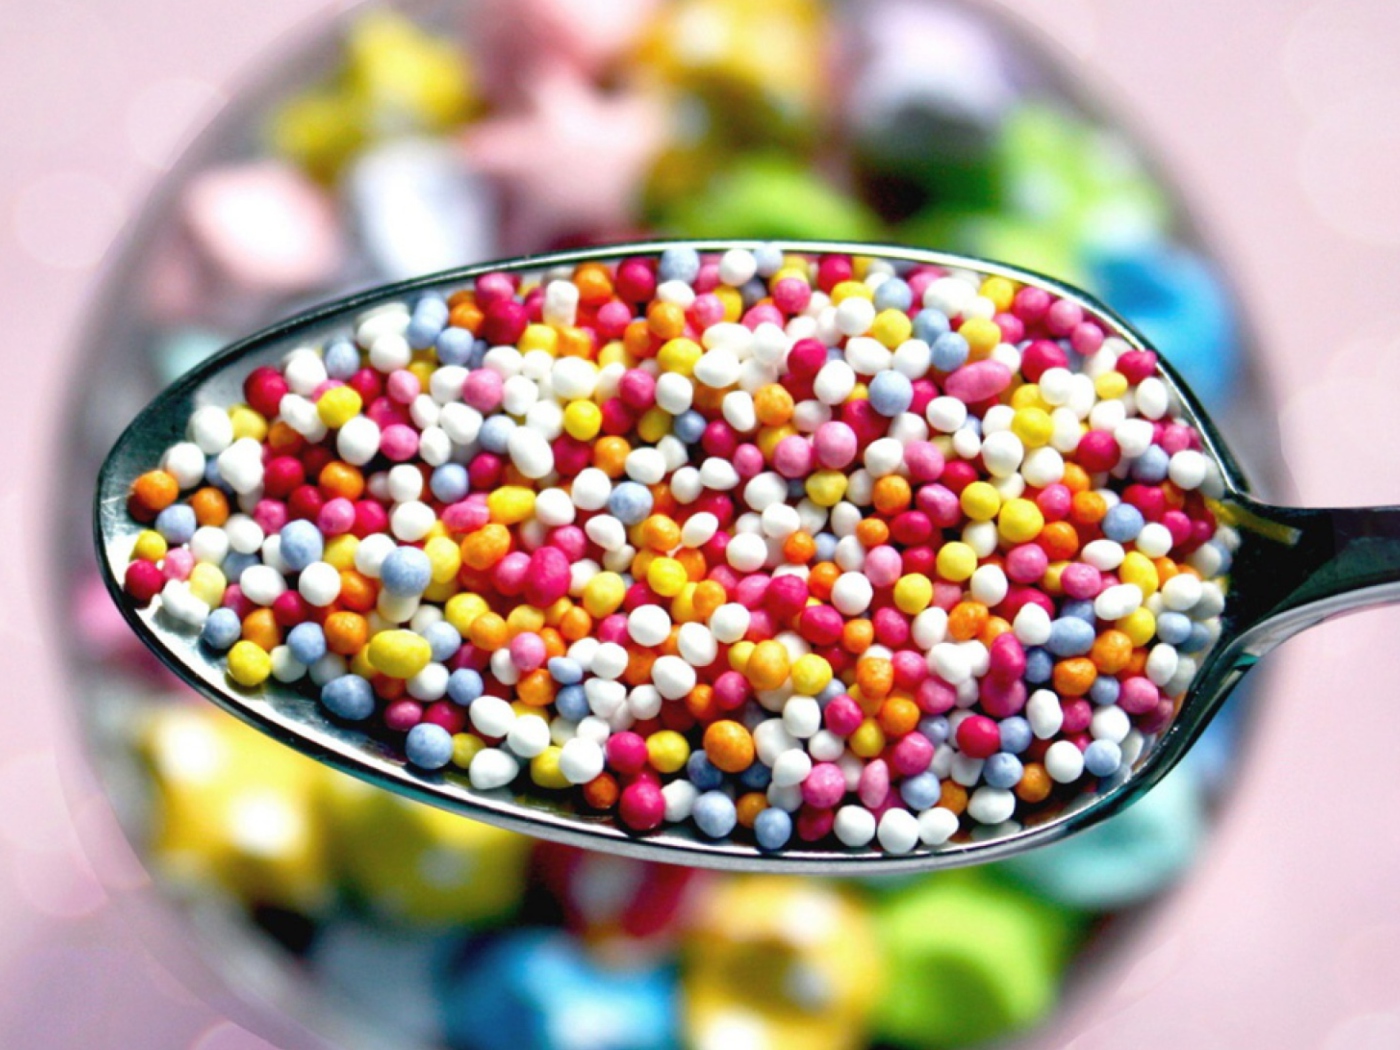 Colorful Candies wallpaper 1400x1050